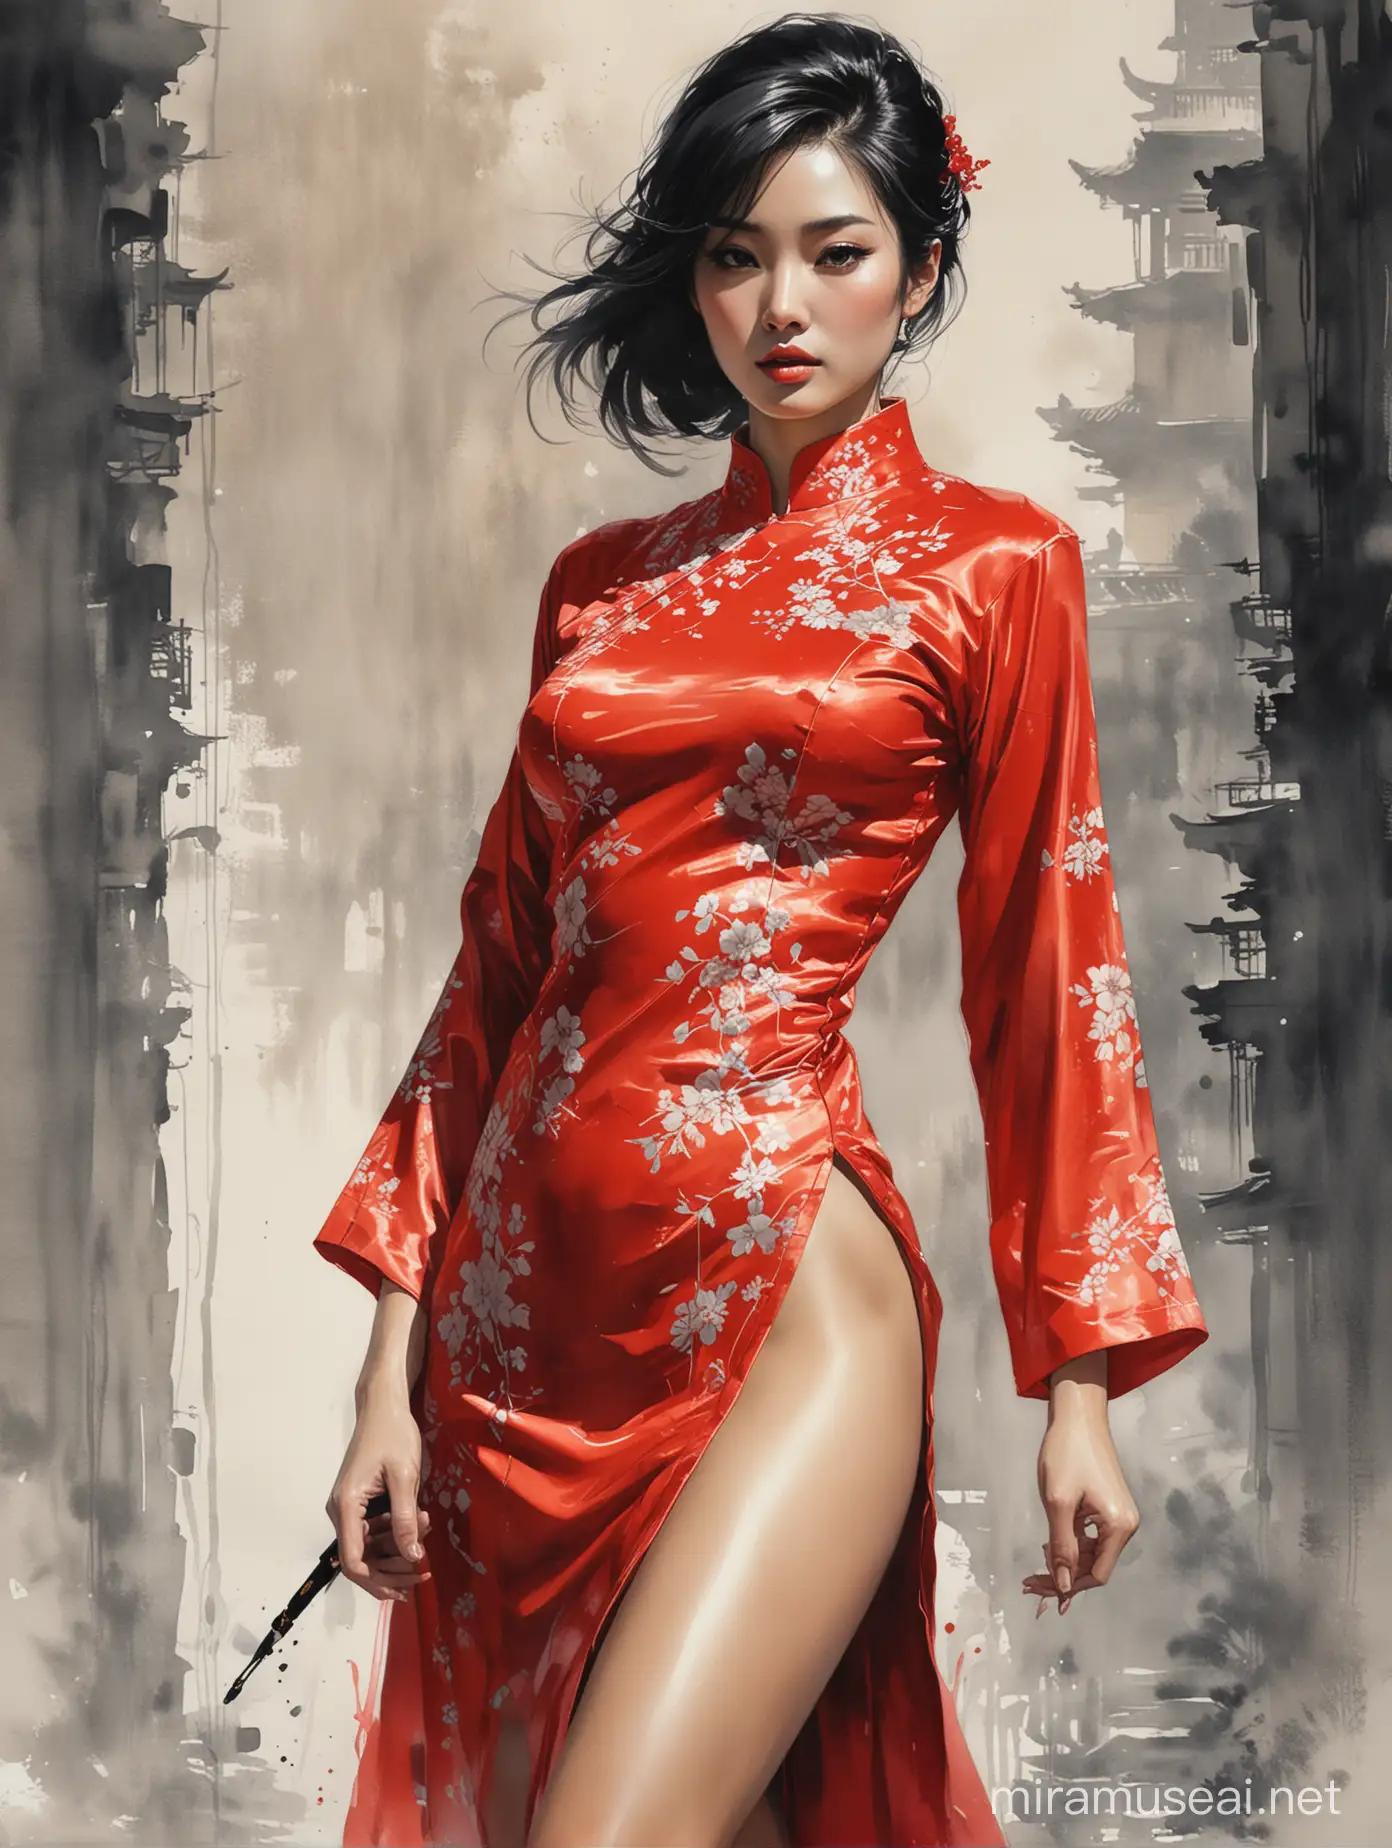 Alex Maleev illustration depicting alluring sultry well-built seductive Sun Zhenni wearing shiny red qipao with high slit, smooth shiny thigh, big black eyes, short wavy black hair, seductive pose, watercolor, no distortion, gray palette, insanely high detail, very high quality